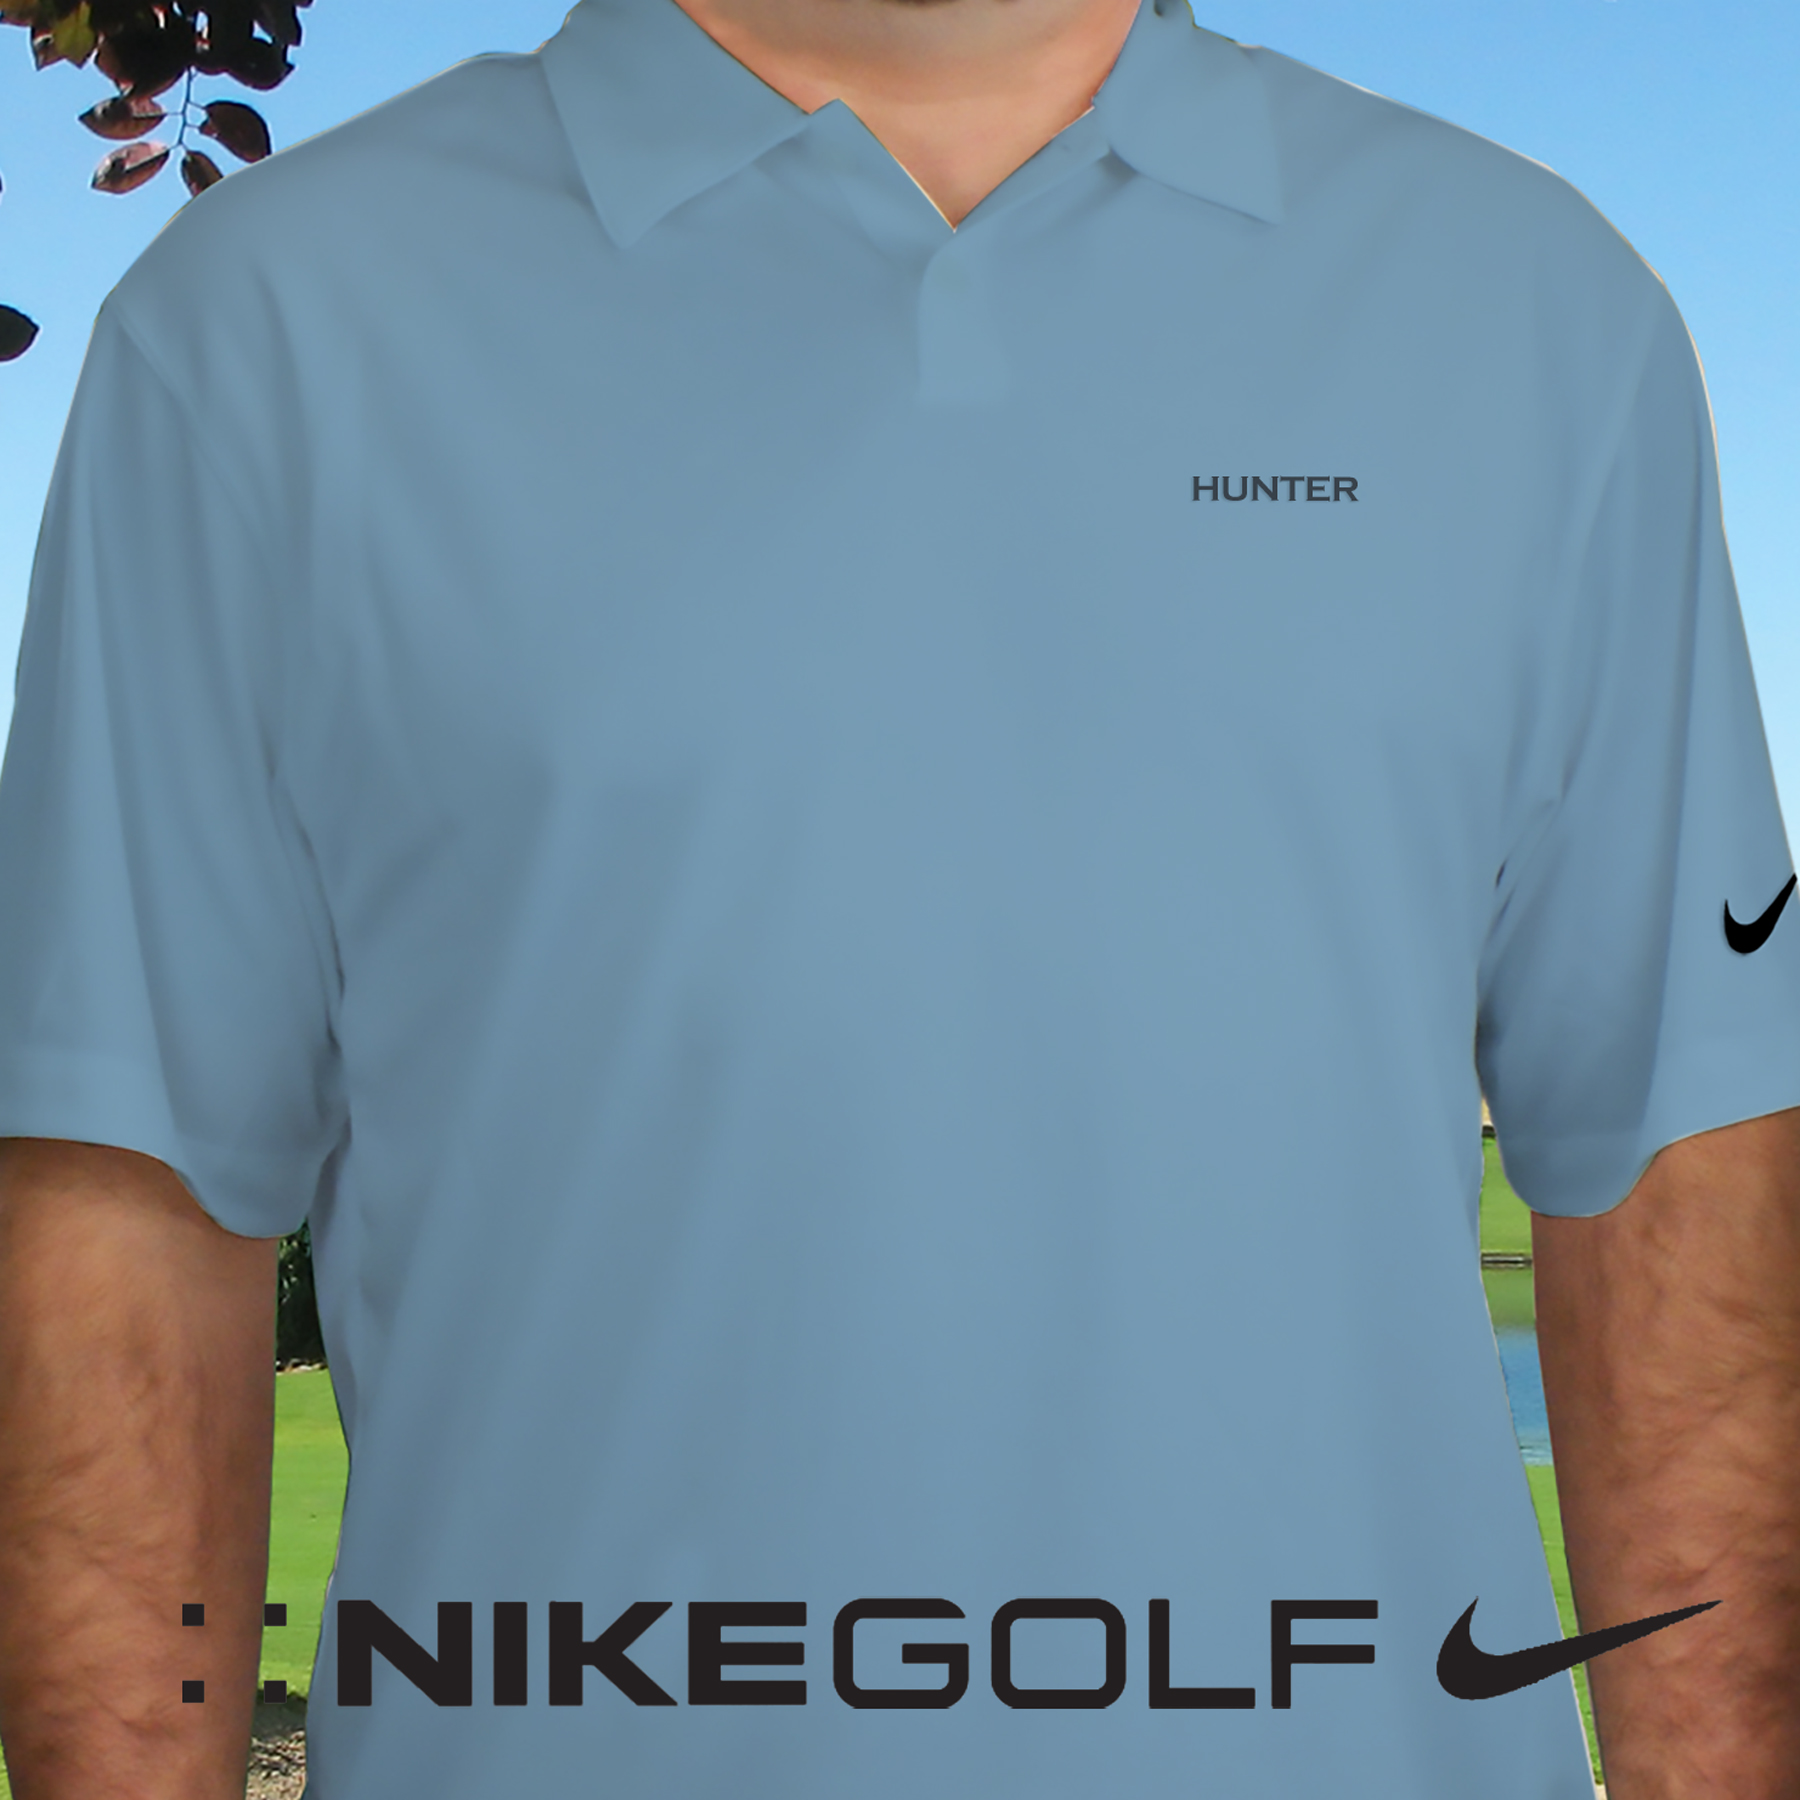 Embroidered Name Nike Dri-FIT Light Blue Polo Shirt | Embroidered Golf Shirts